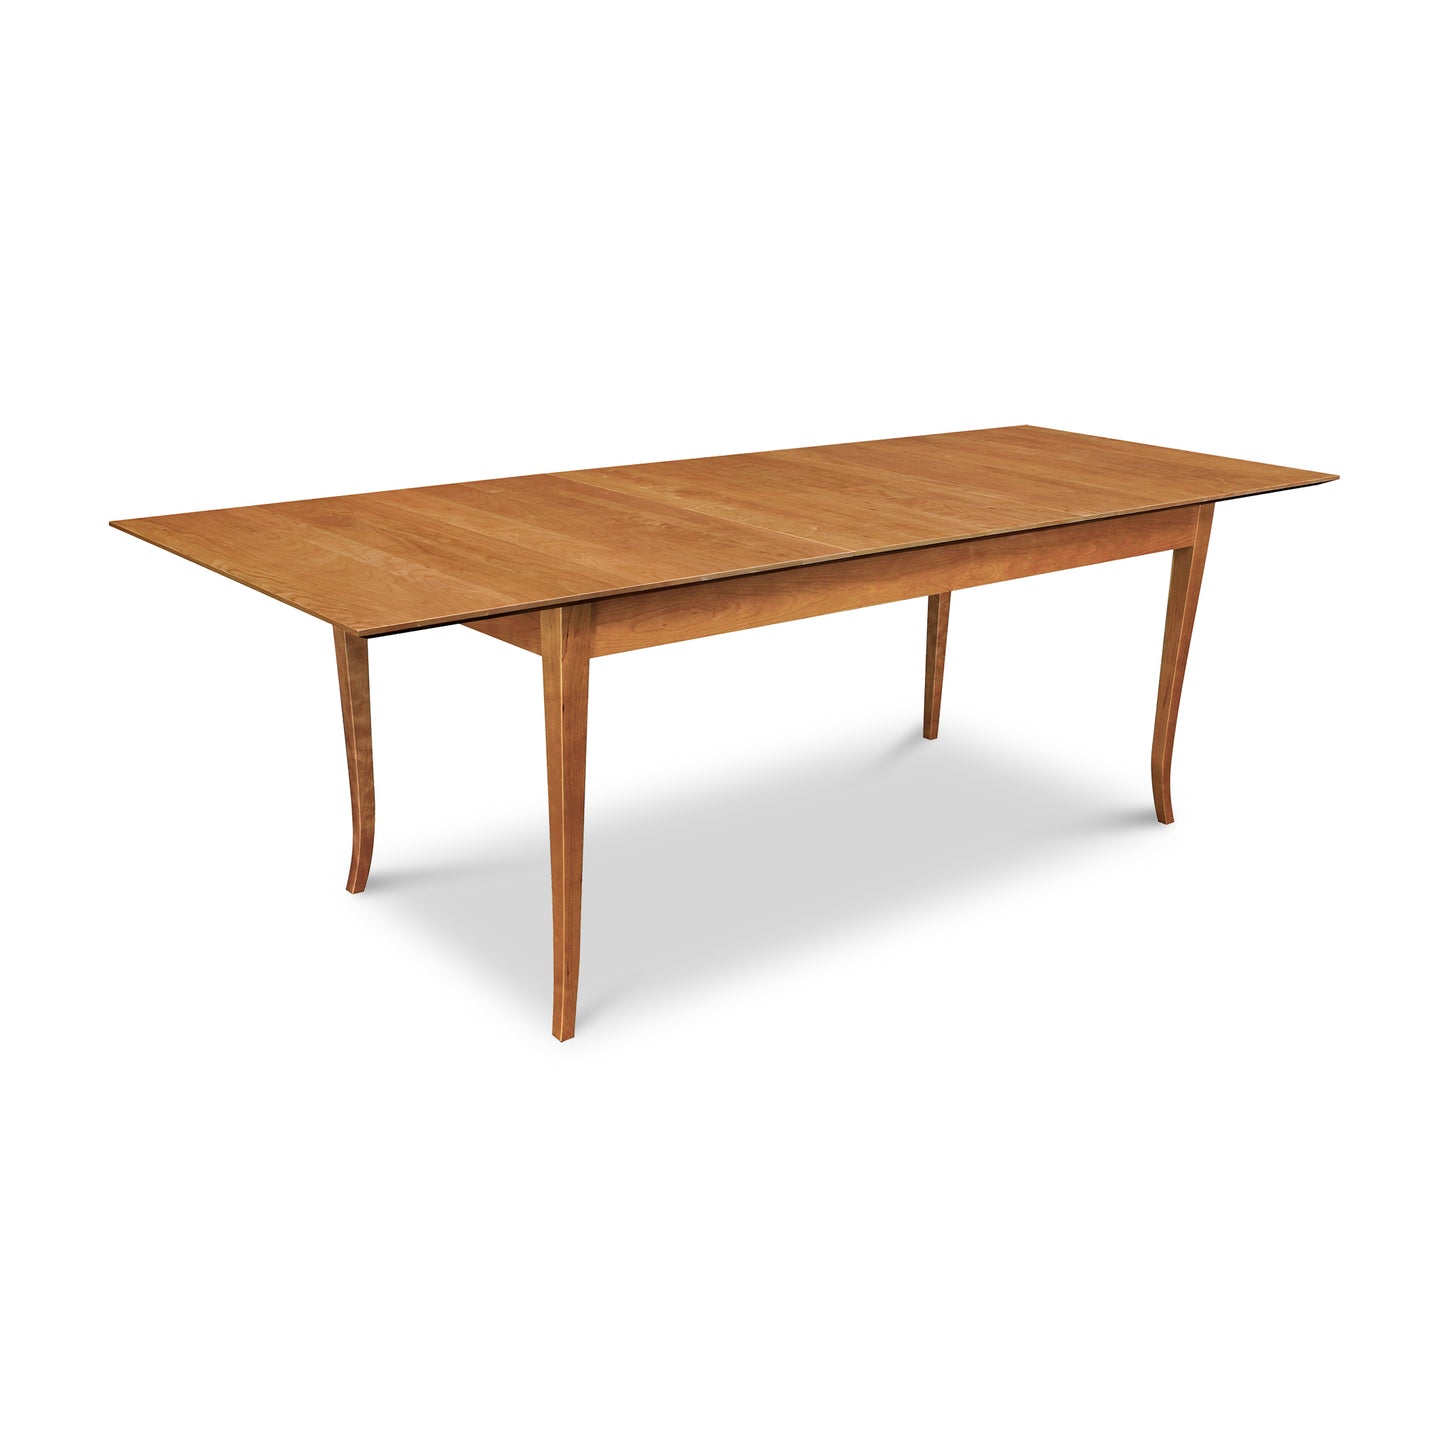 A Classic Shaker Flare Leg Butterfly Extension Table with a wooden top and flared legs by Lyndon Furniture.